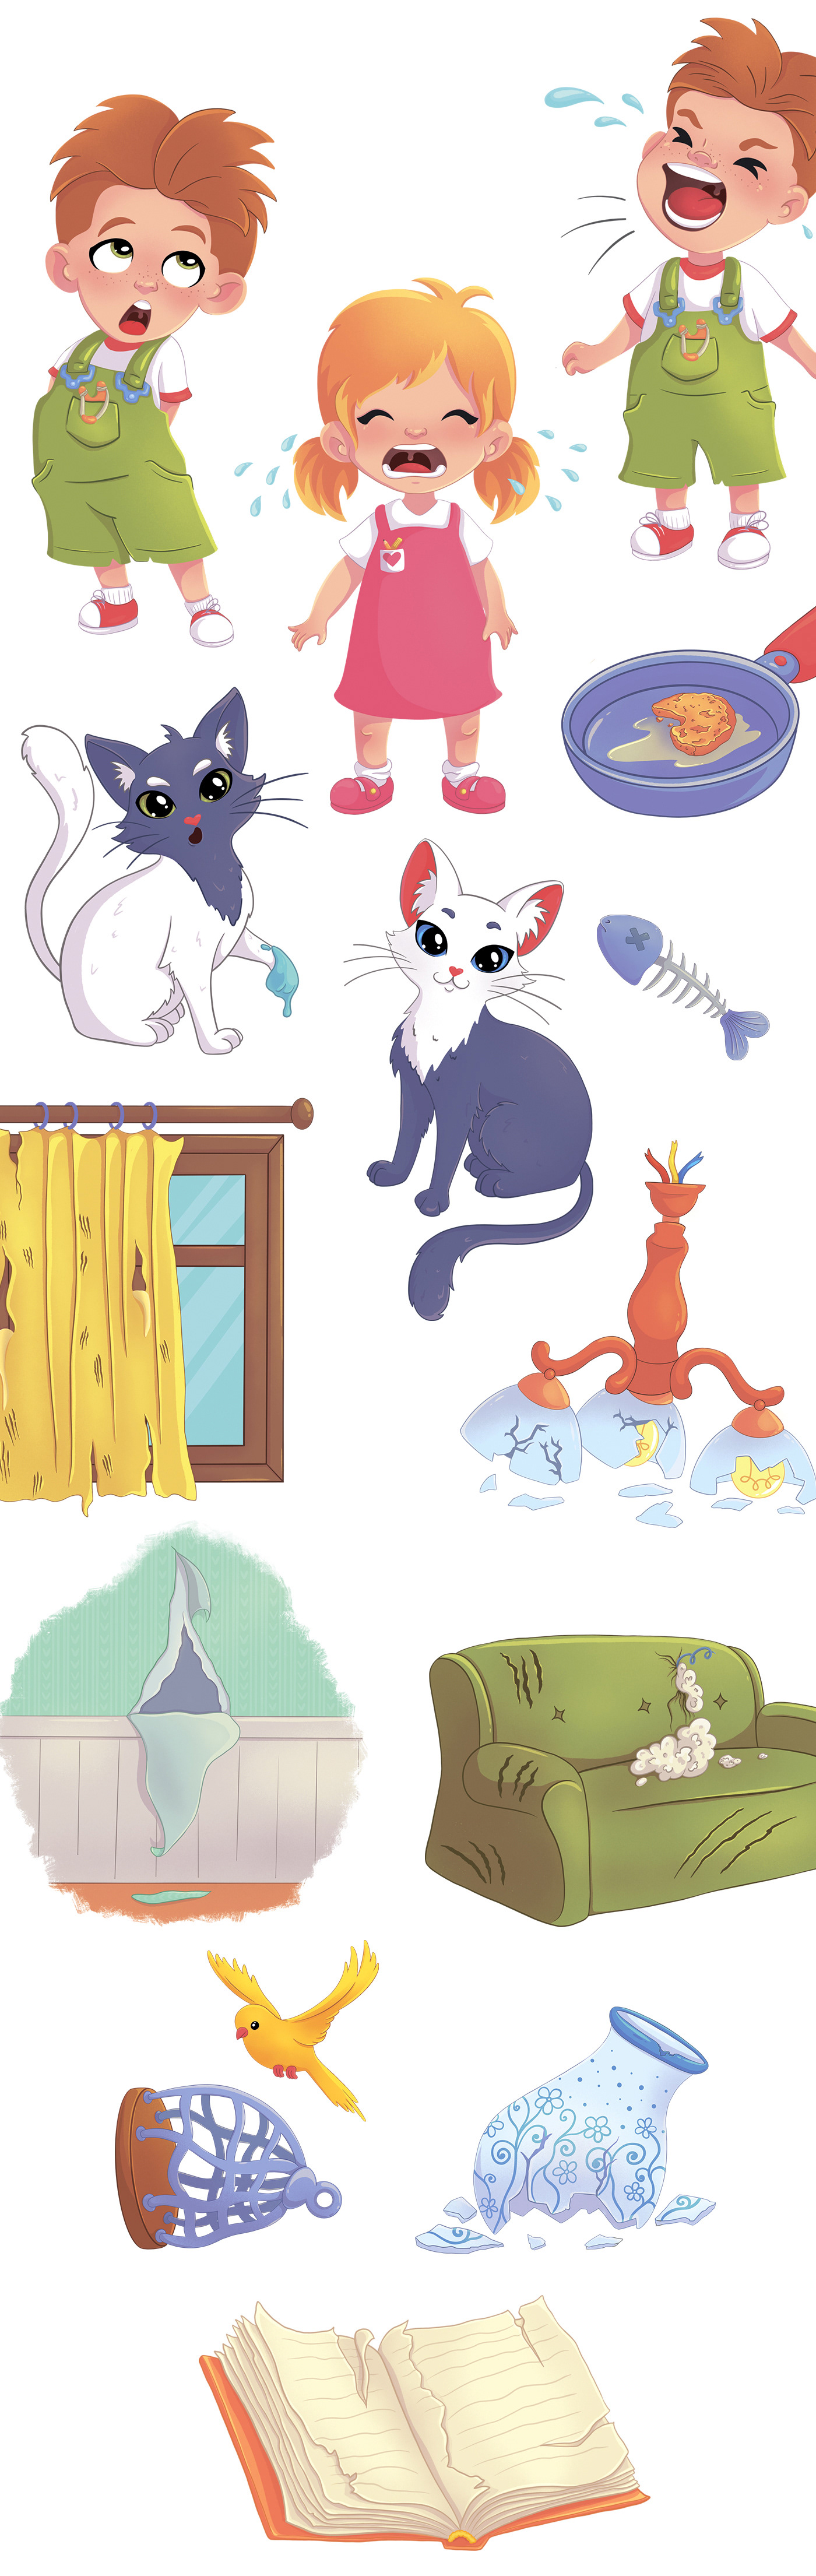 Cat Character design  children game ILLUSTRATION  Packaging Procreate step by step